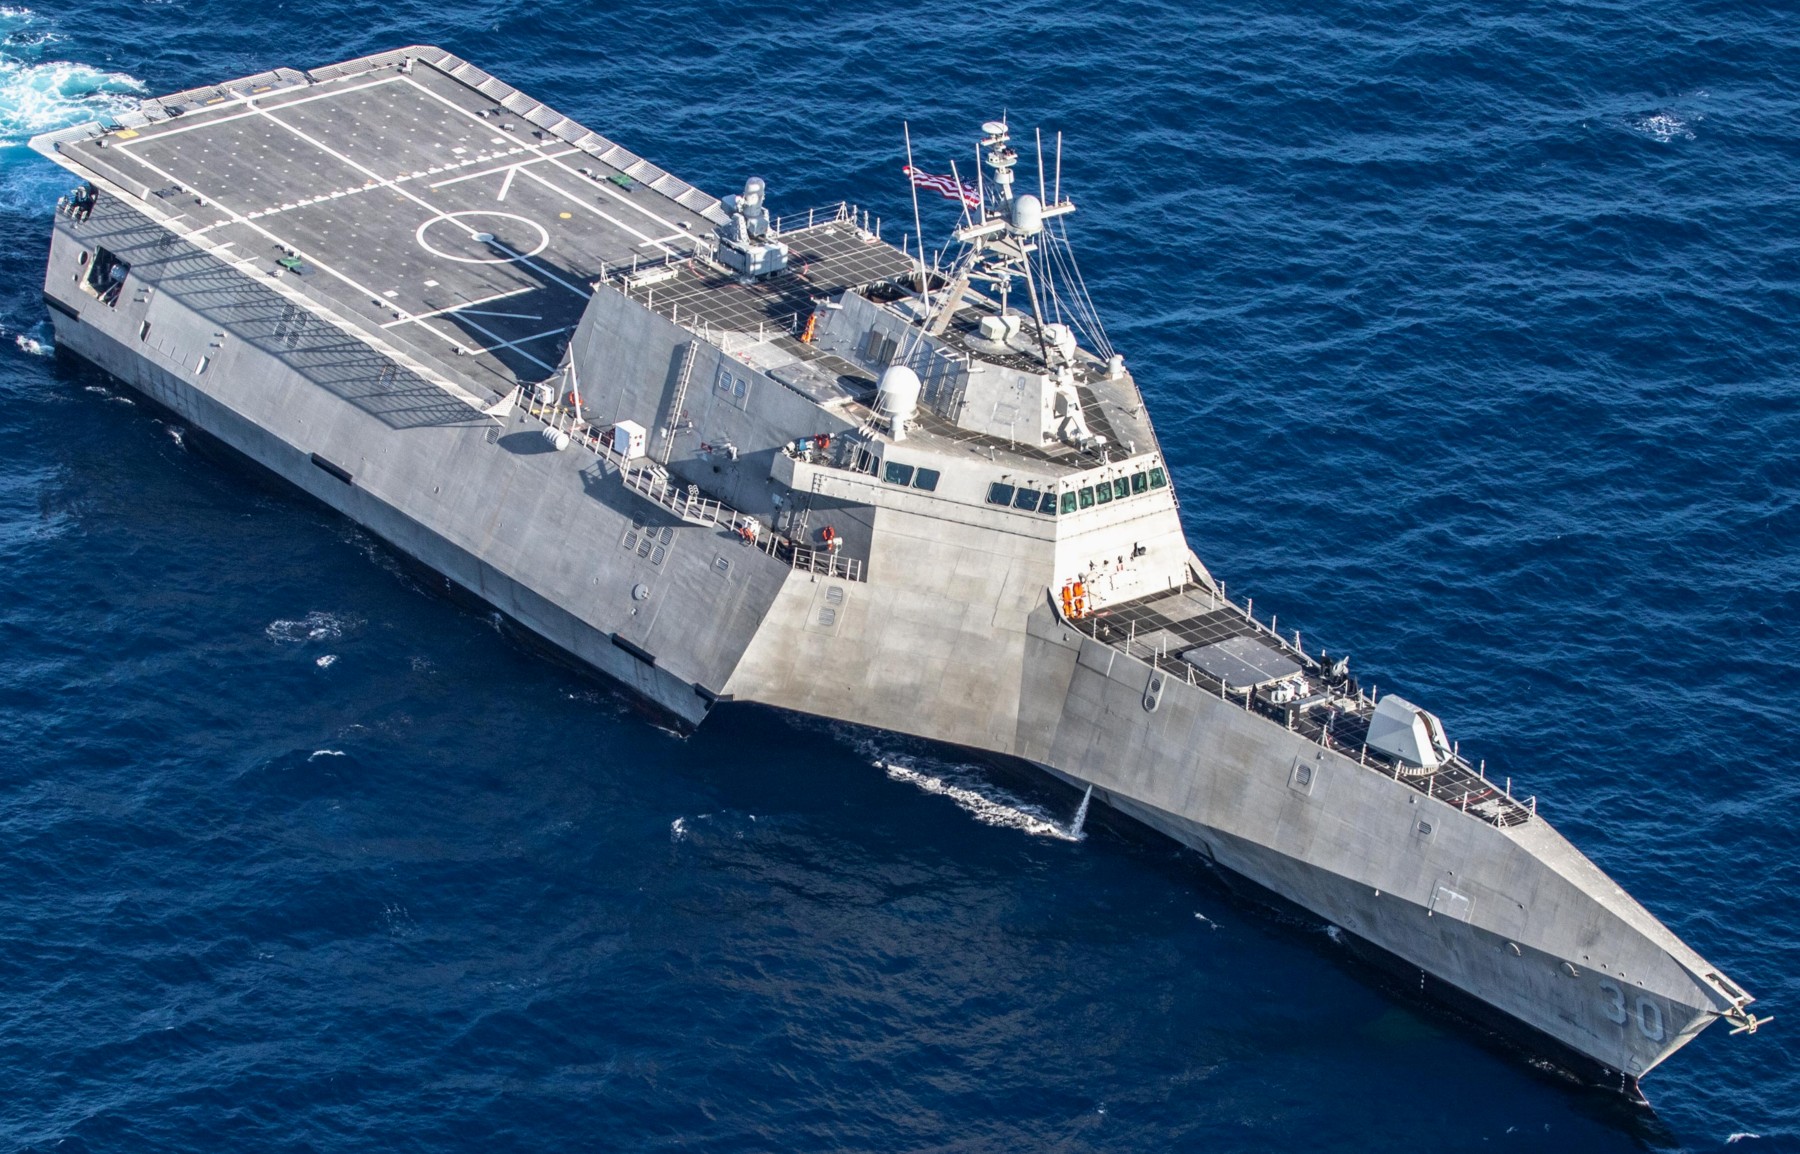 lcs-30 uss canberra littoral combat ship independence class us navy 22